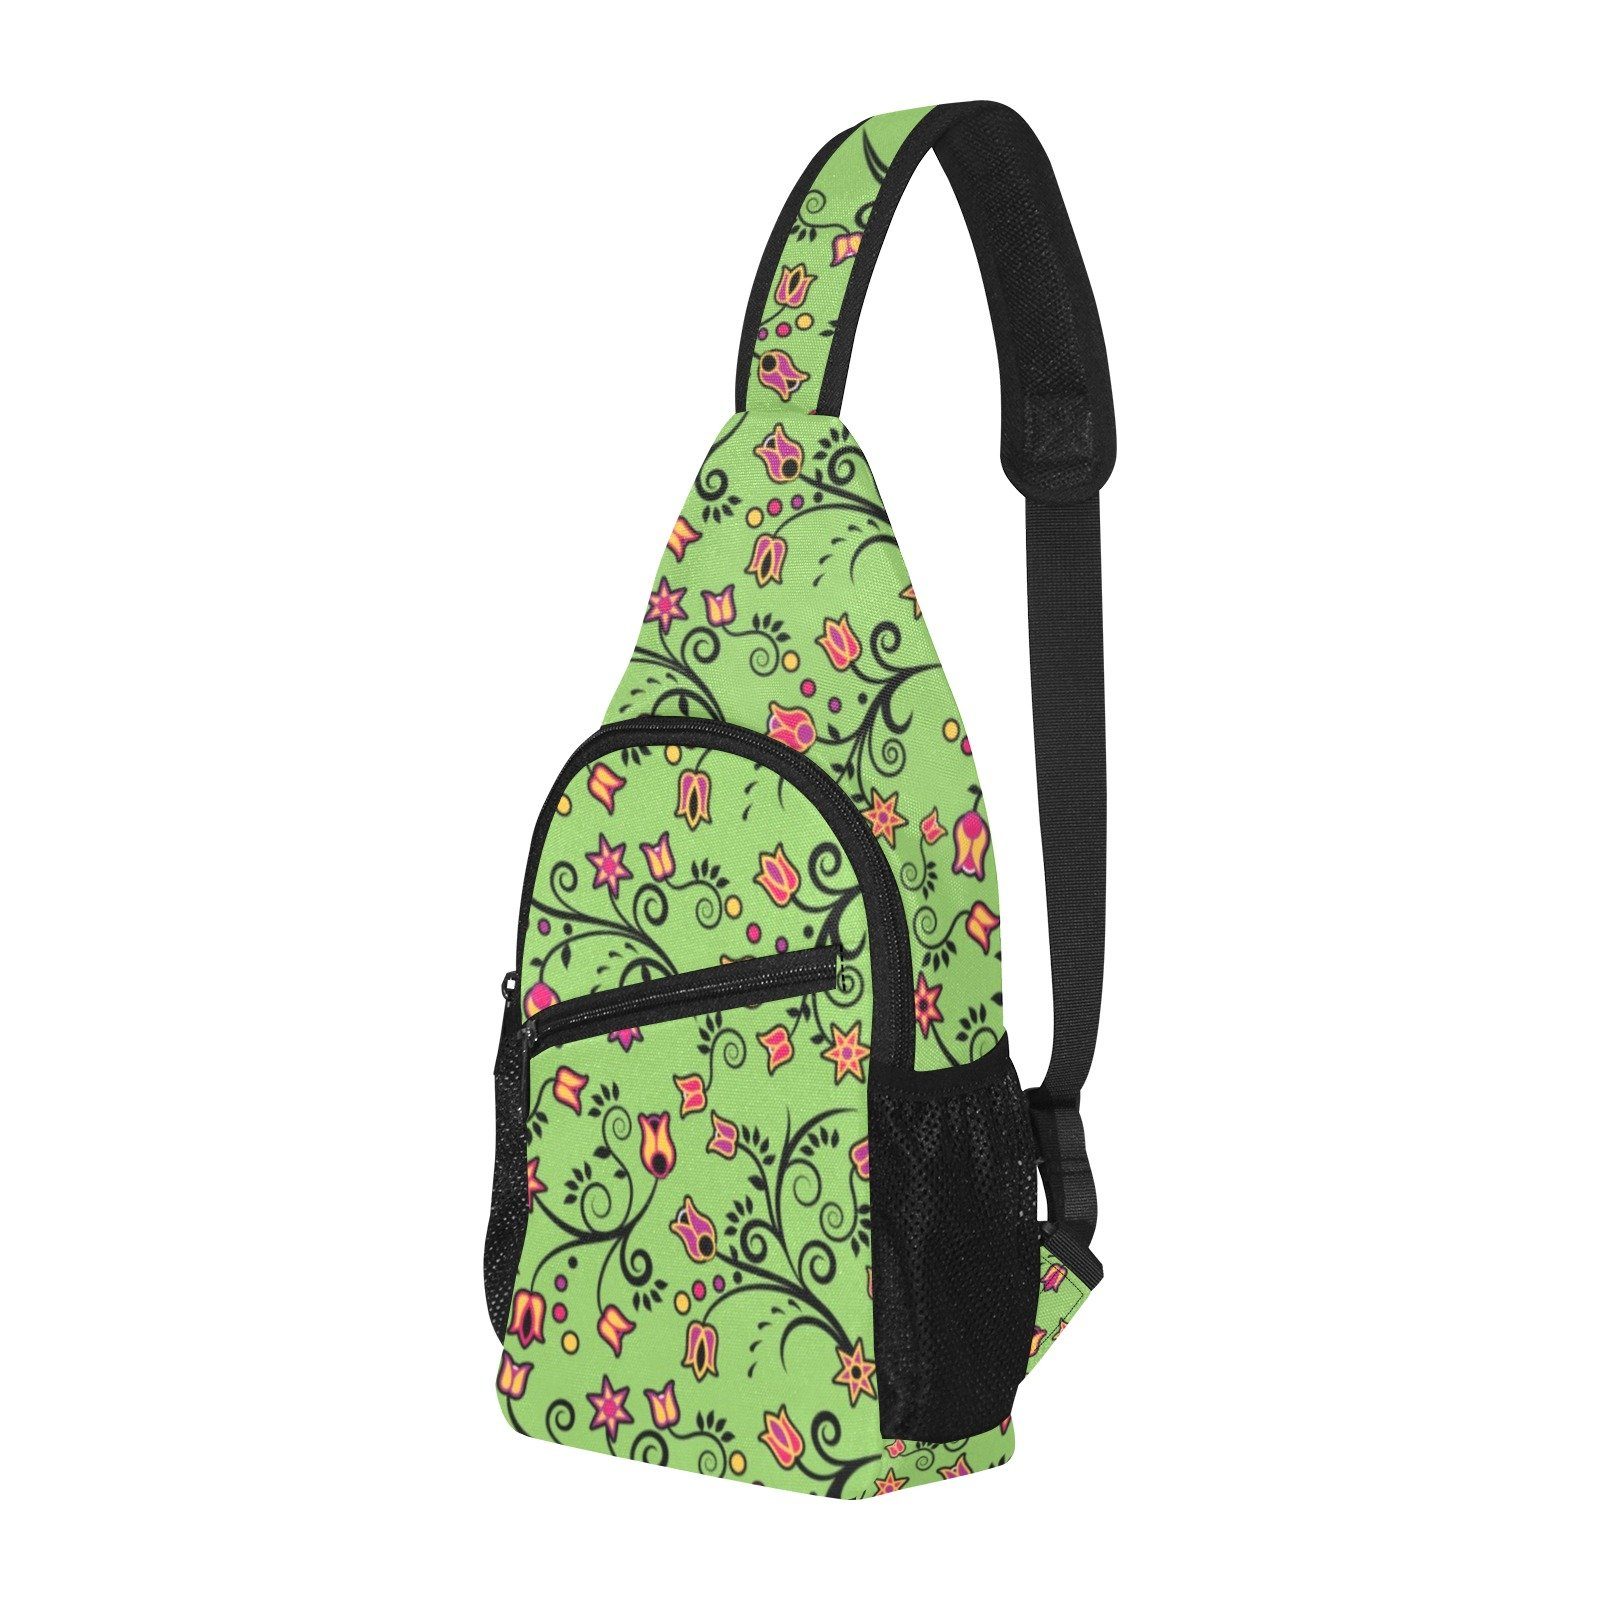 LightGreen Yellow Star All Over Print Chest Bag (Model 1719) All Over Print Chest Bag (1719) e-joyer 